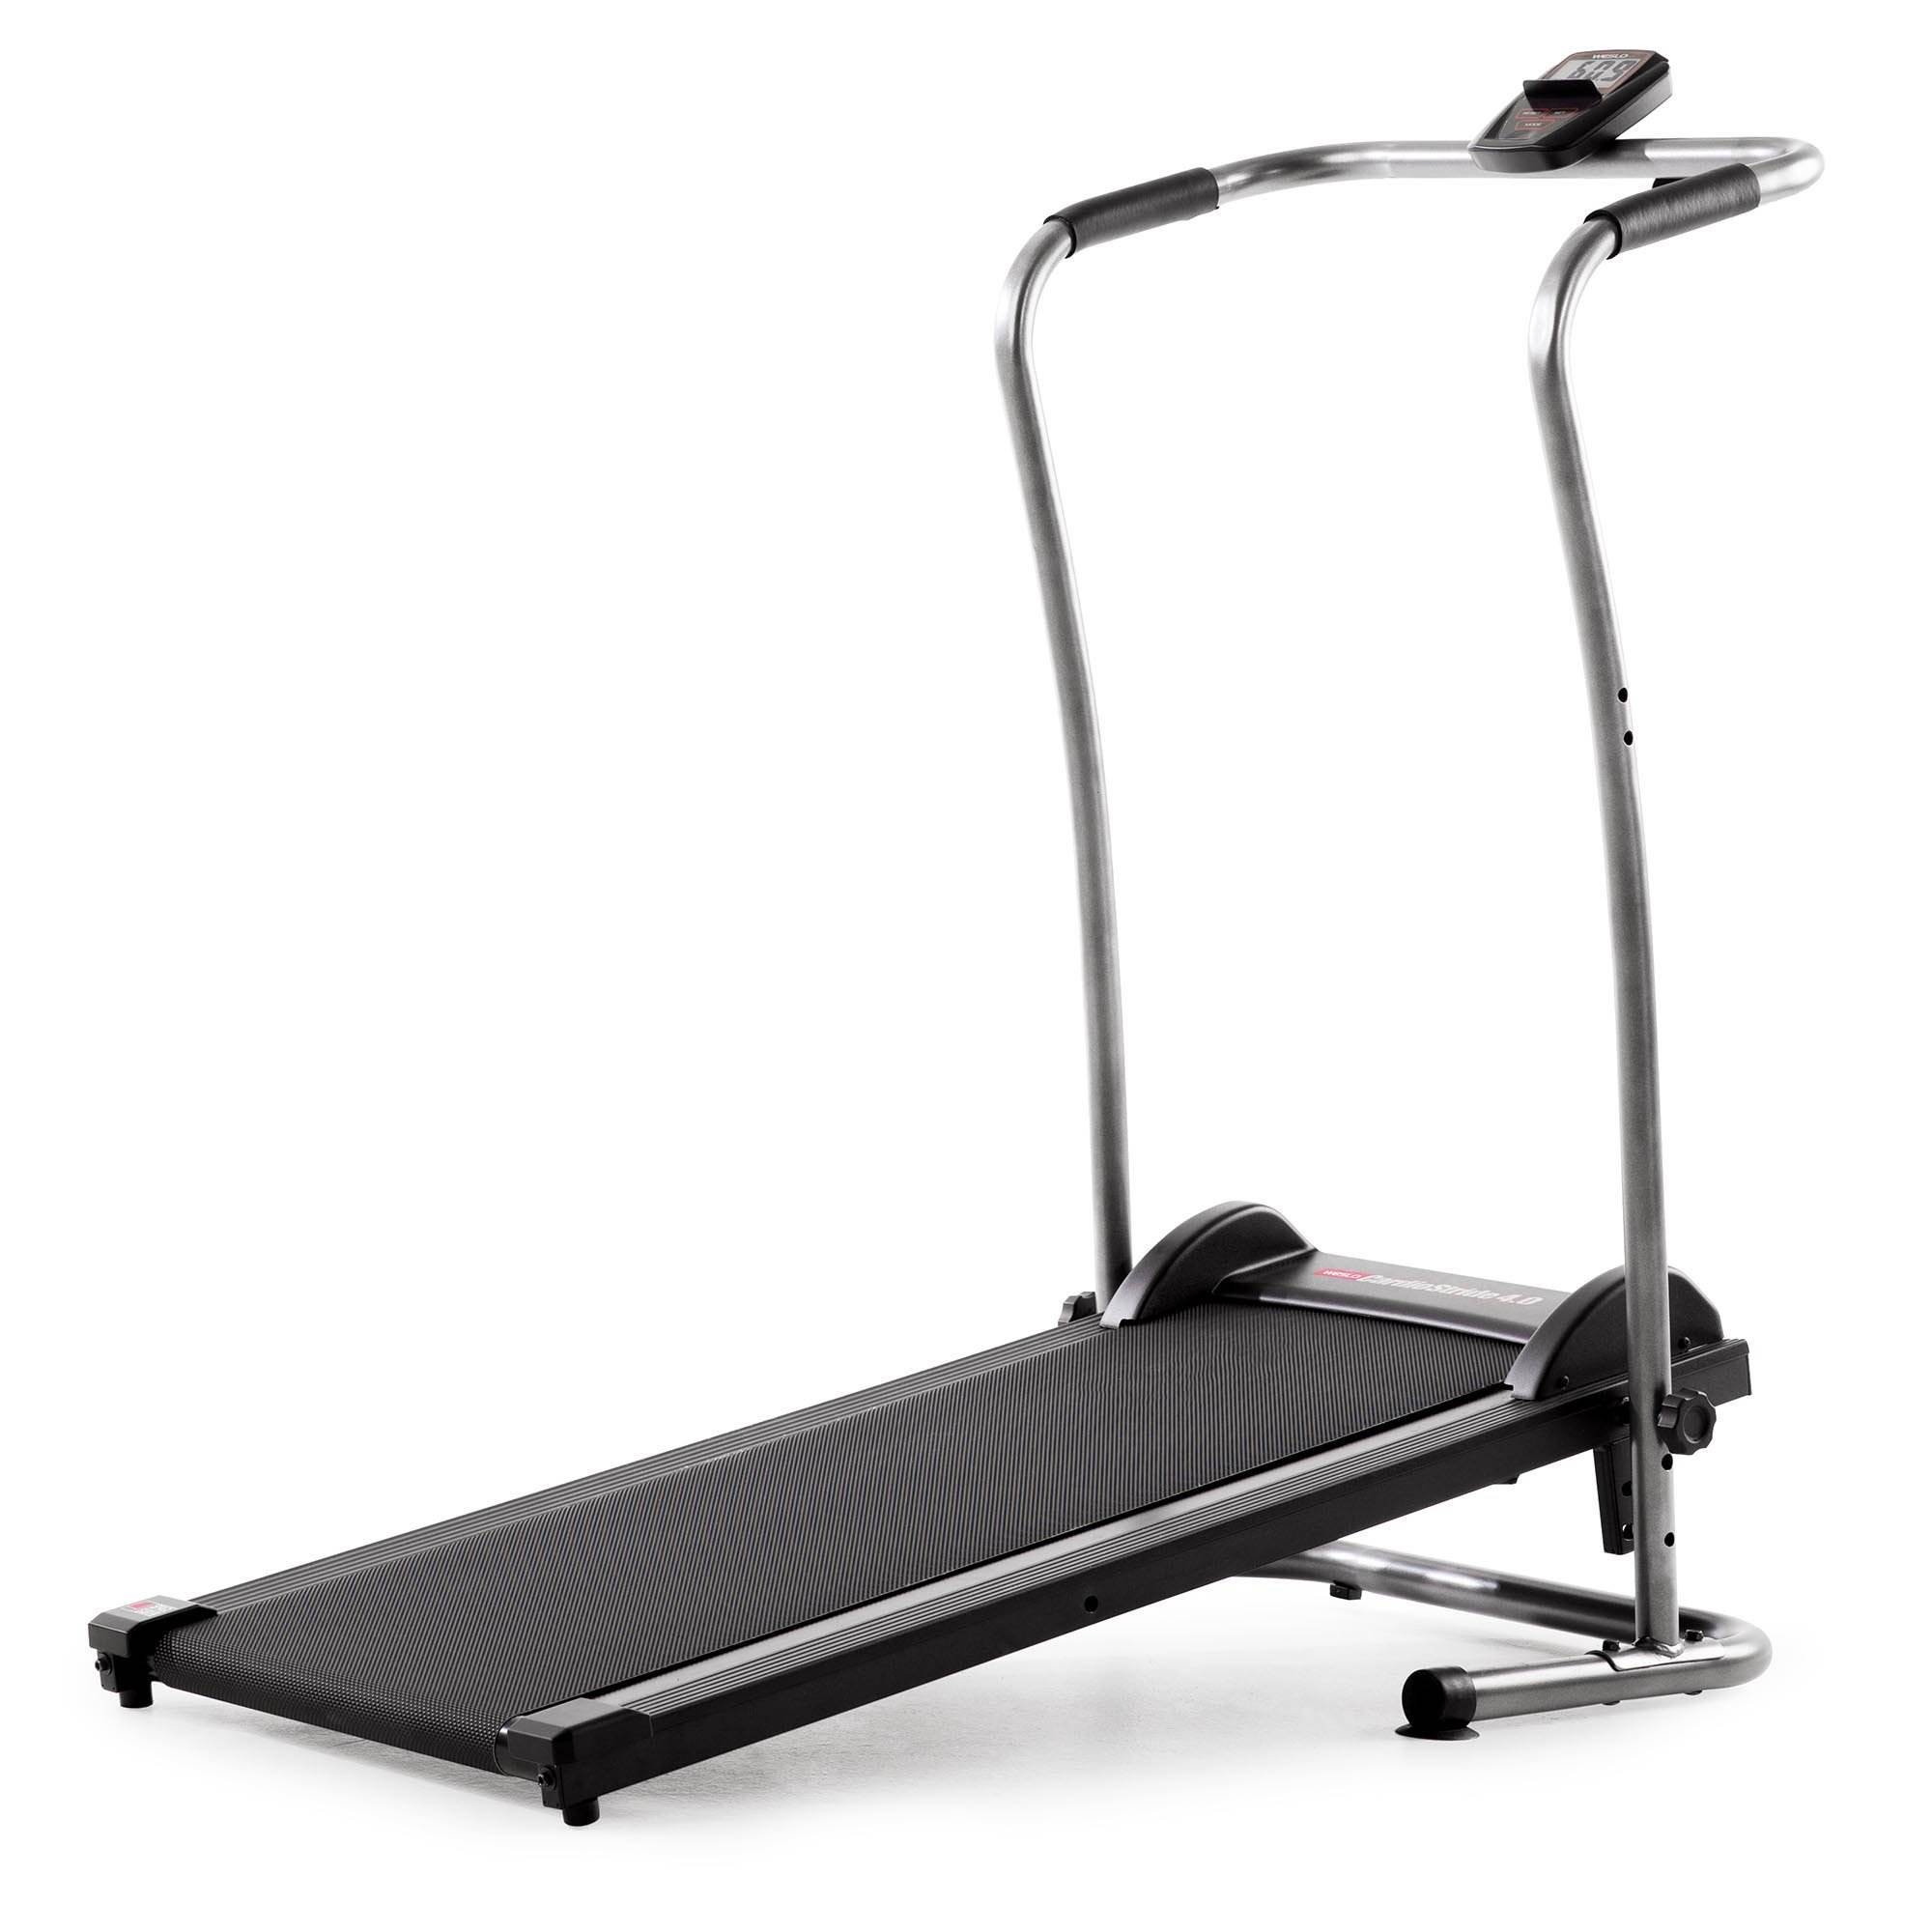 Weslo CardioStride 4.0 Manual Folding Treadmill with Adjustable Incline and LCD Window Display - image 1 of 12